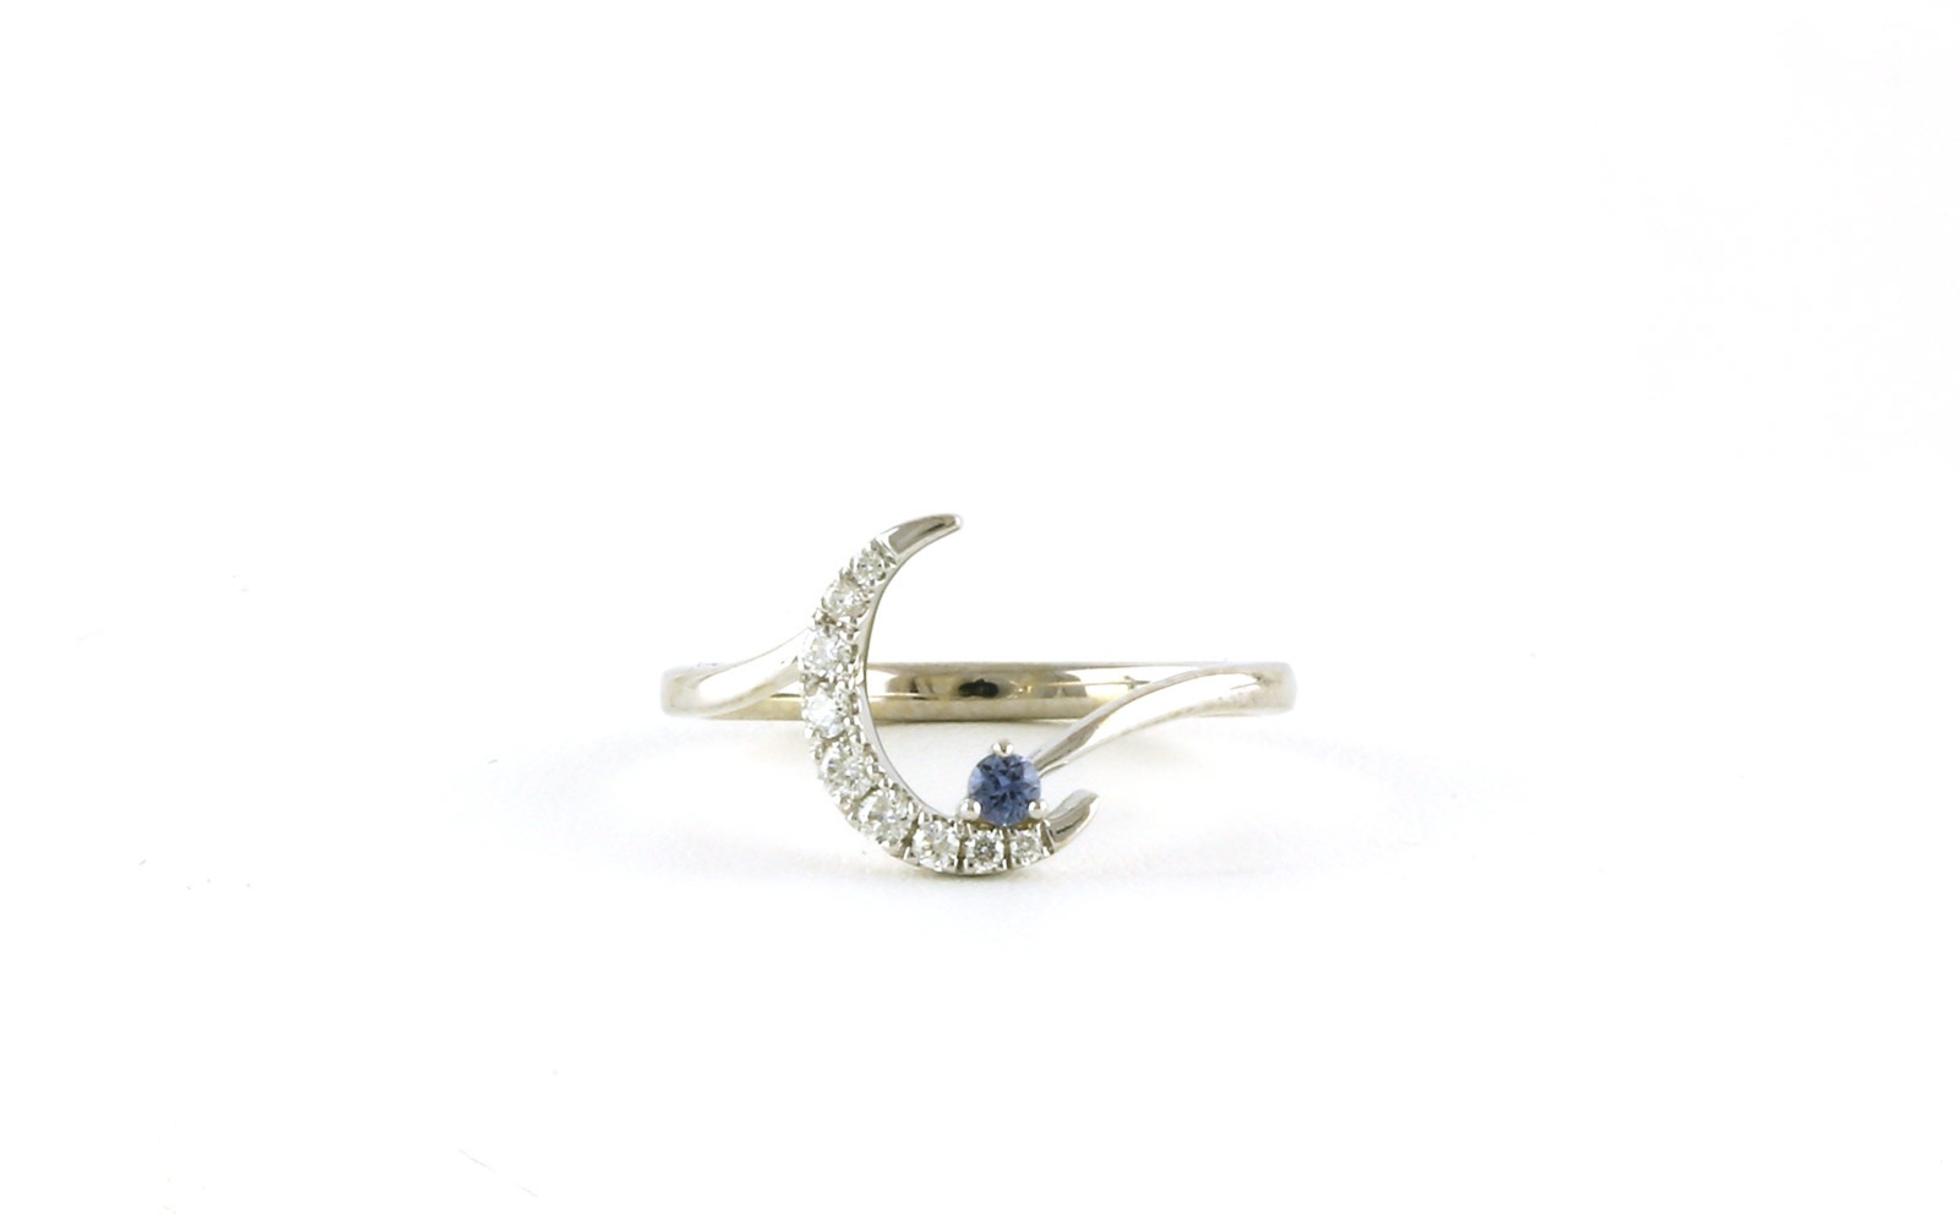 Crescent Moon Montana Yogo Sapphire and Diamond Ring in White Gold (0.19cts TWT)